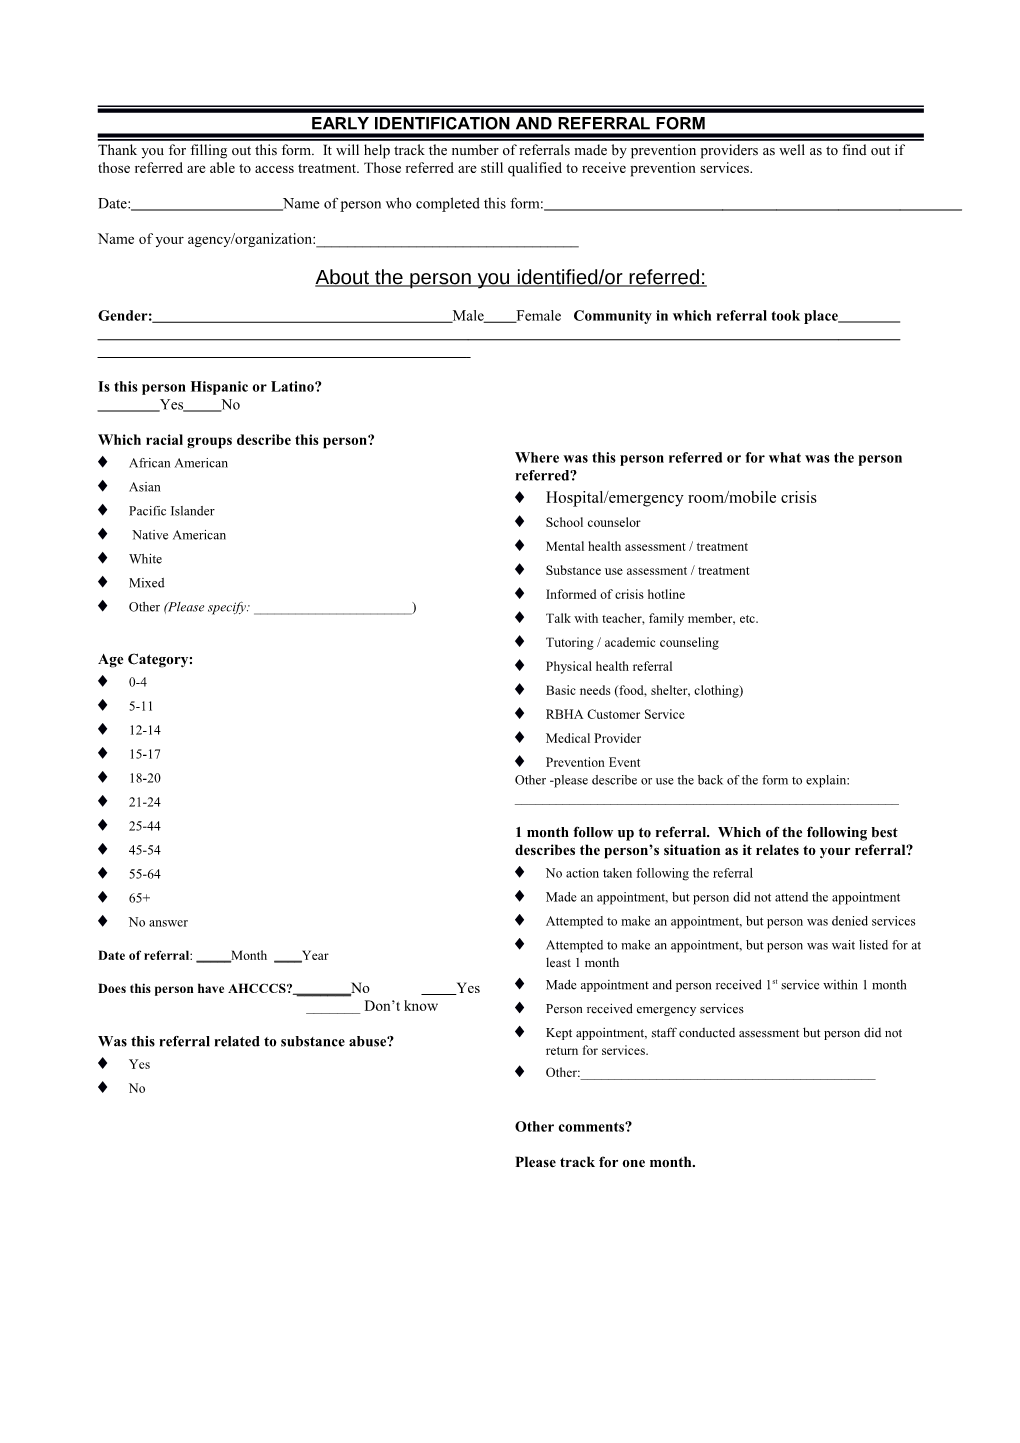 Early Identification and Referral Form